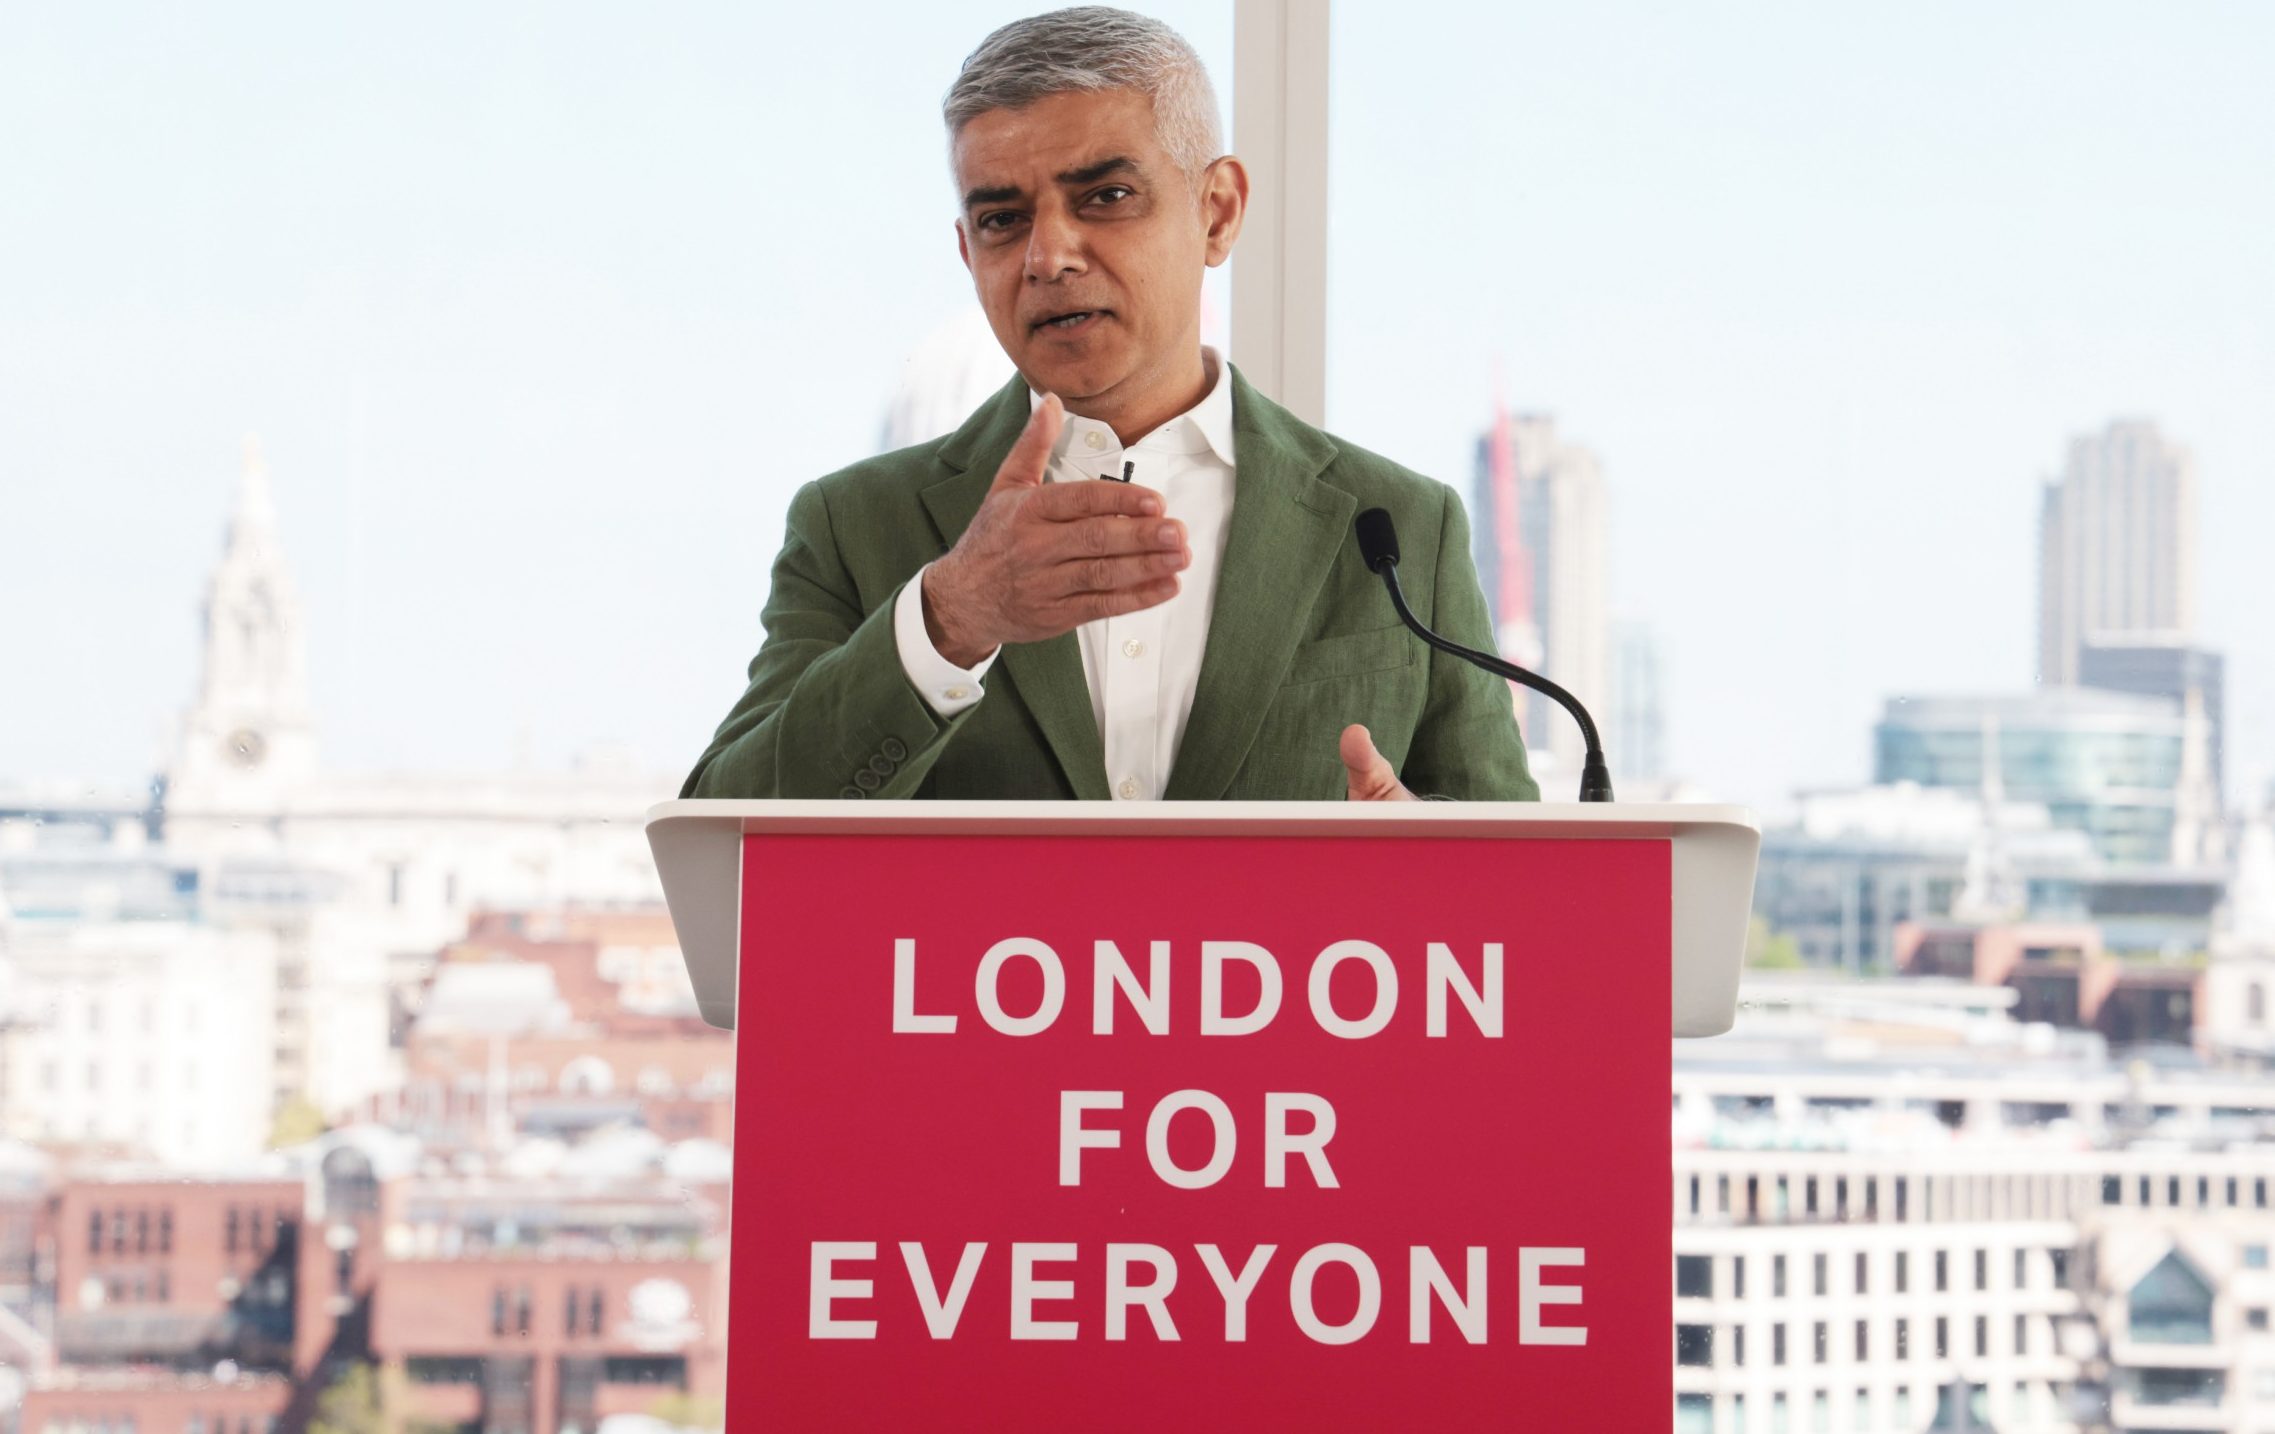 sadiq khan criticised over call for ‘equivalence’ in israel-hamas debate